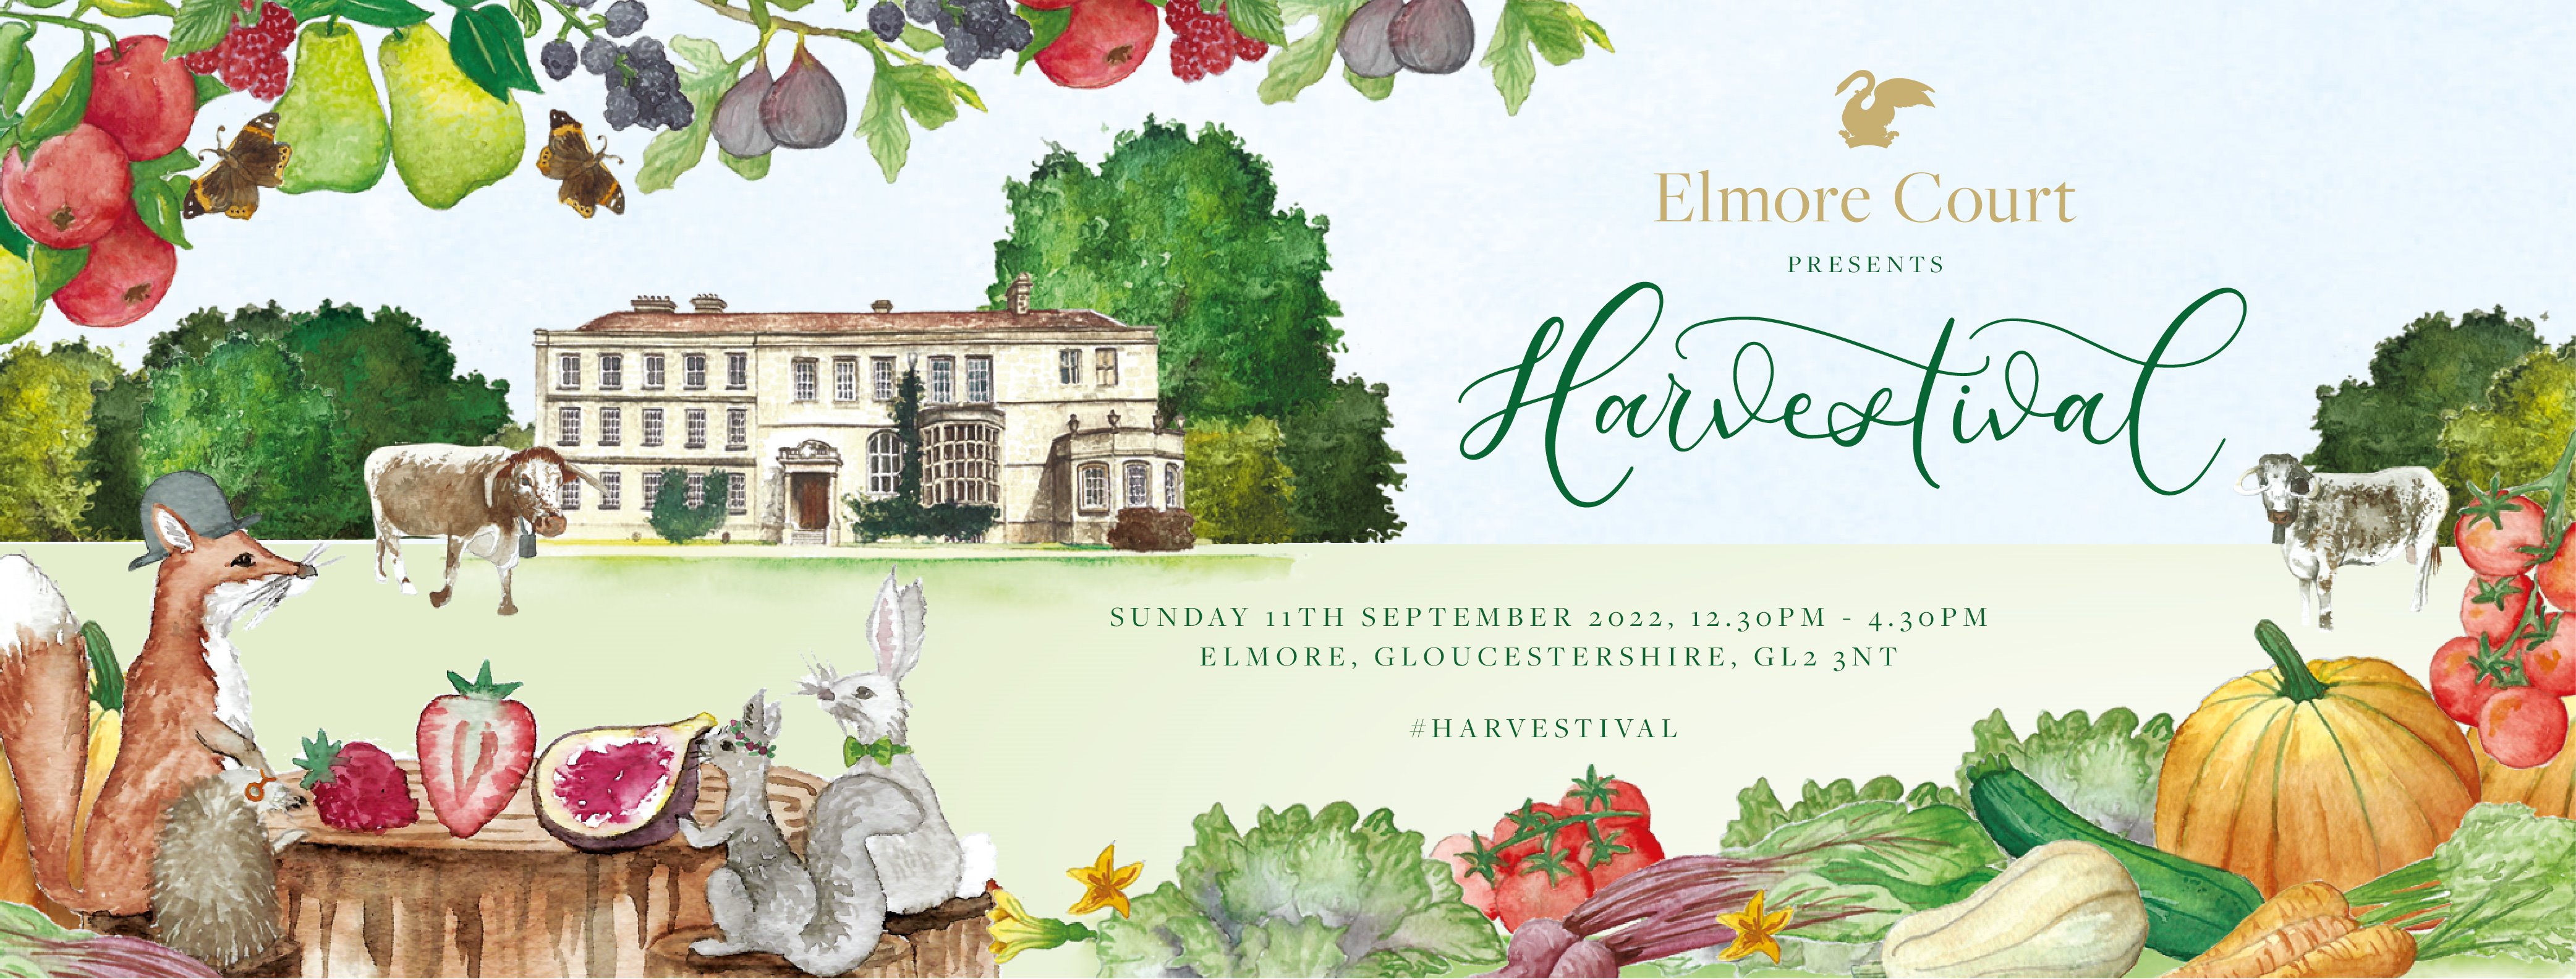 September wedding fair illustration with harvest fruits and animals feasting for an open day at wild wedding venue elmore court 